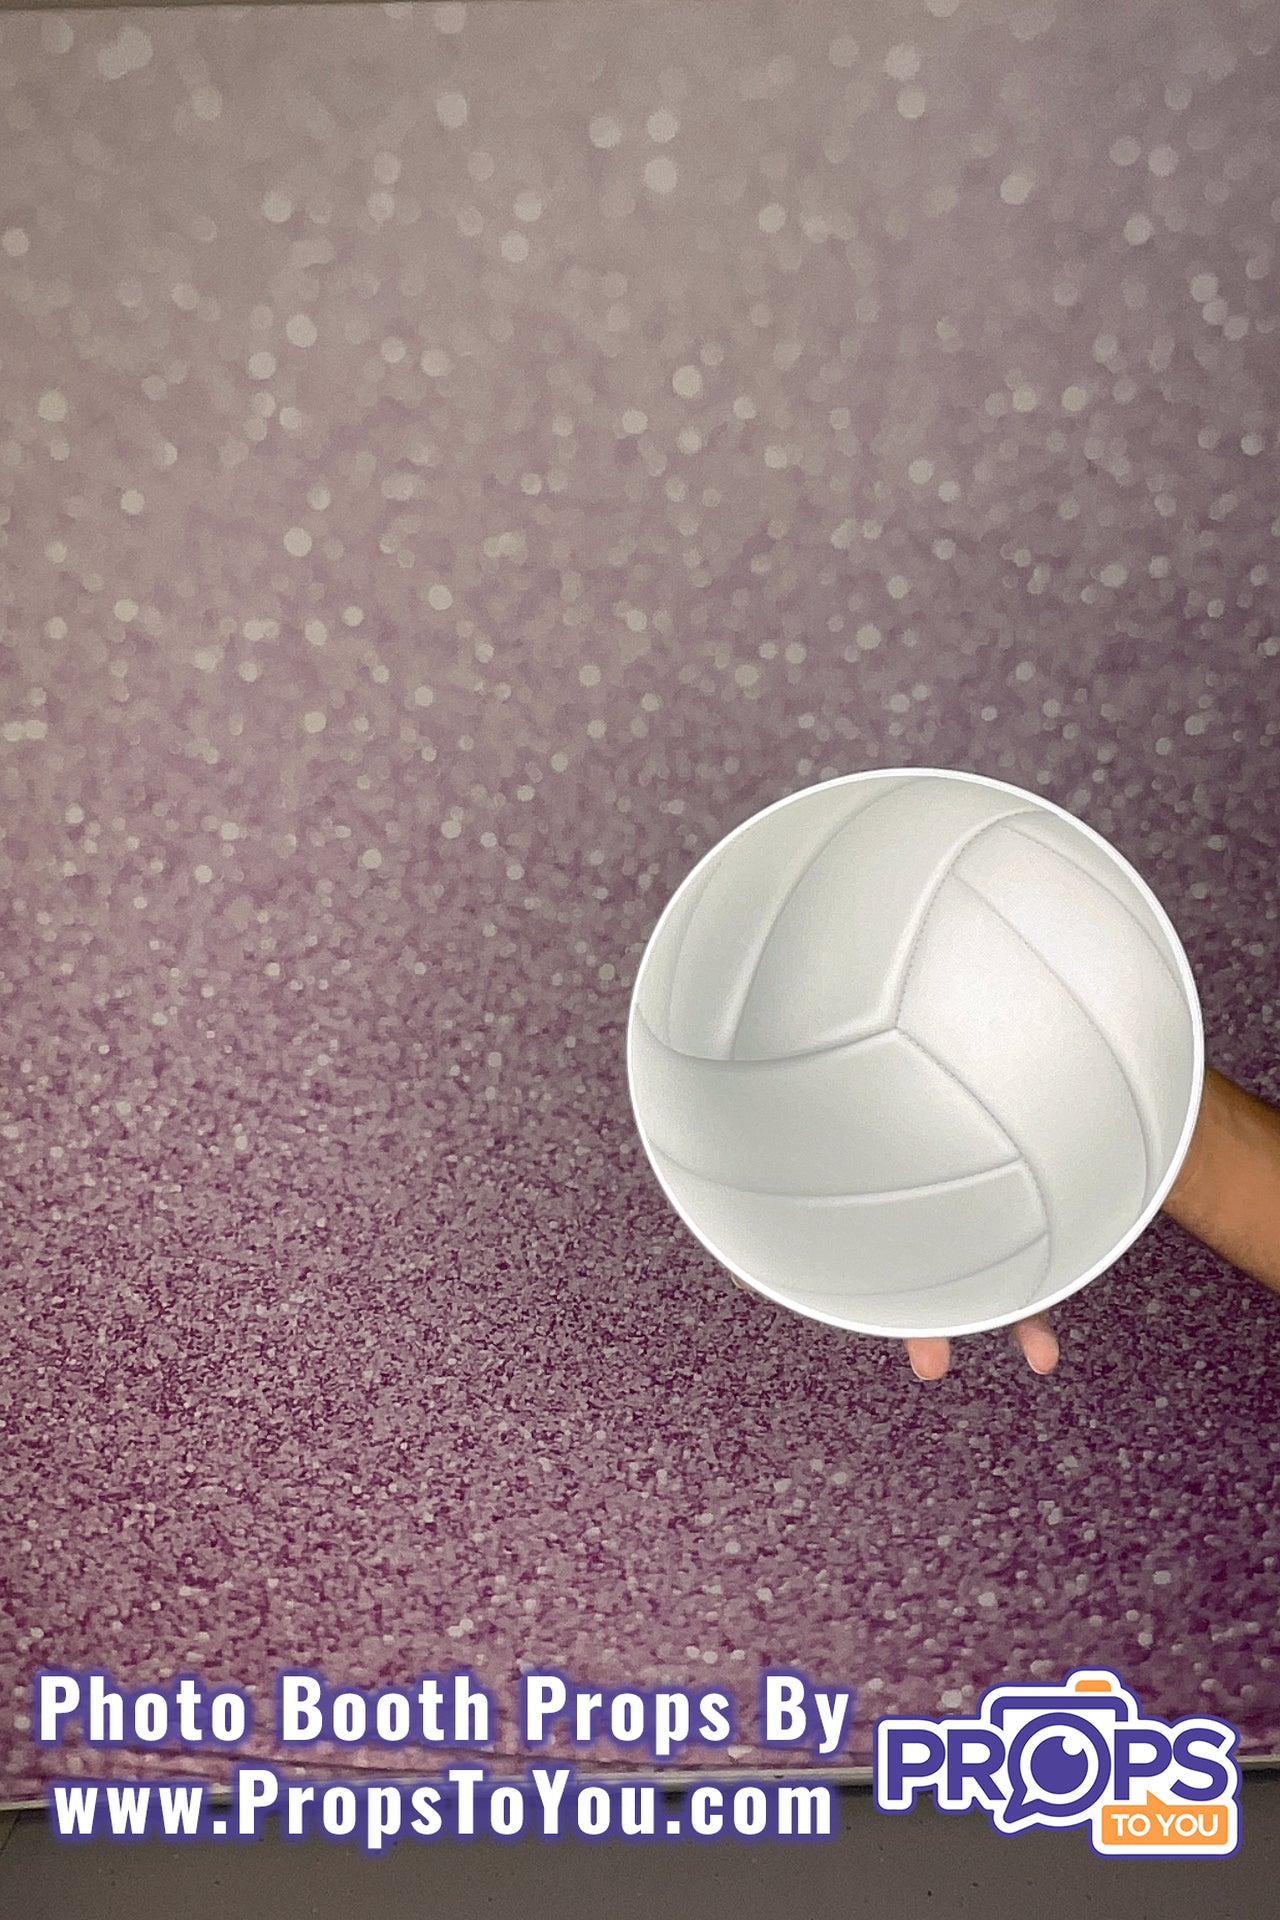 BUNDLE: Volleyball - 5 Double-Sided Photo Booth Props